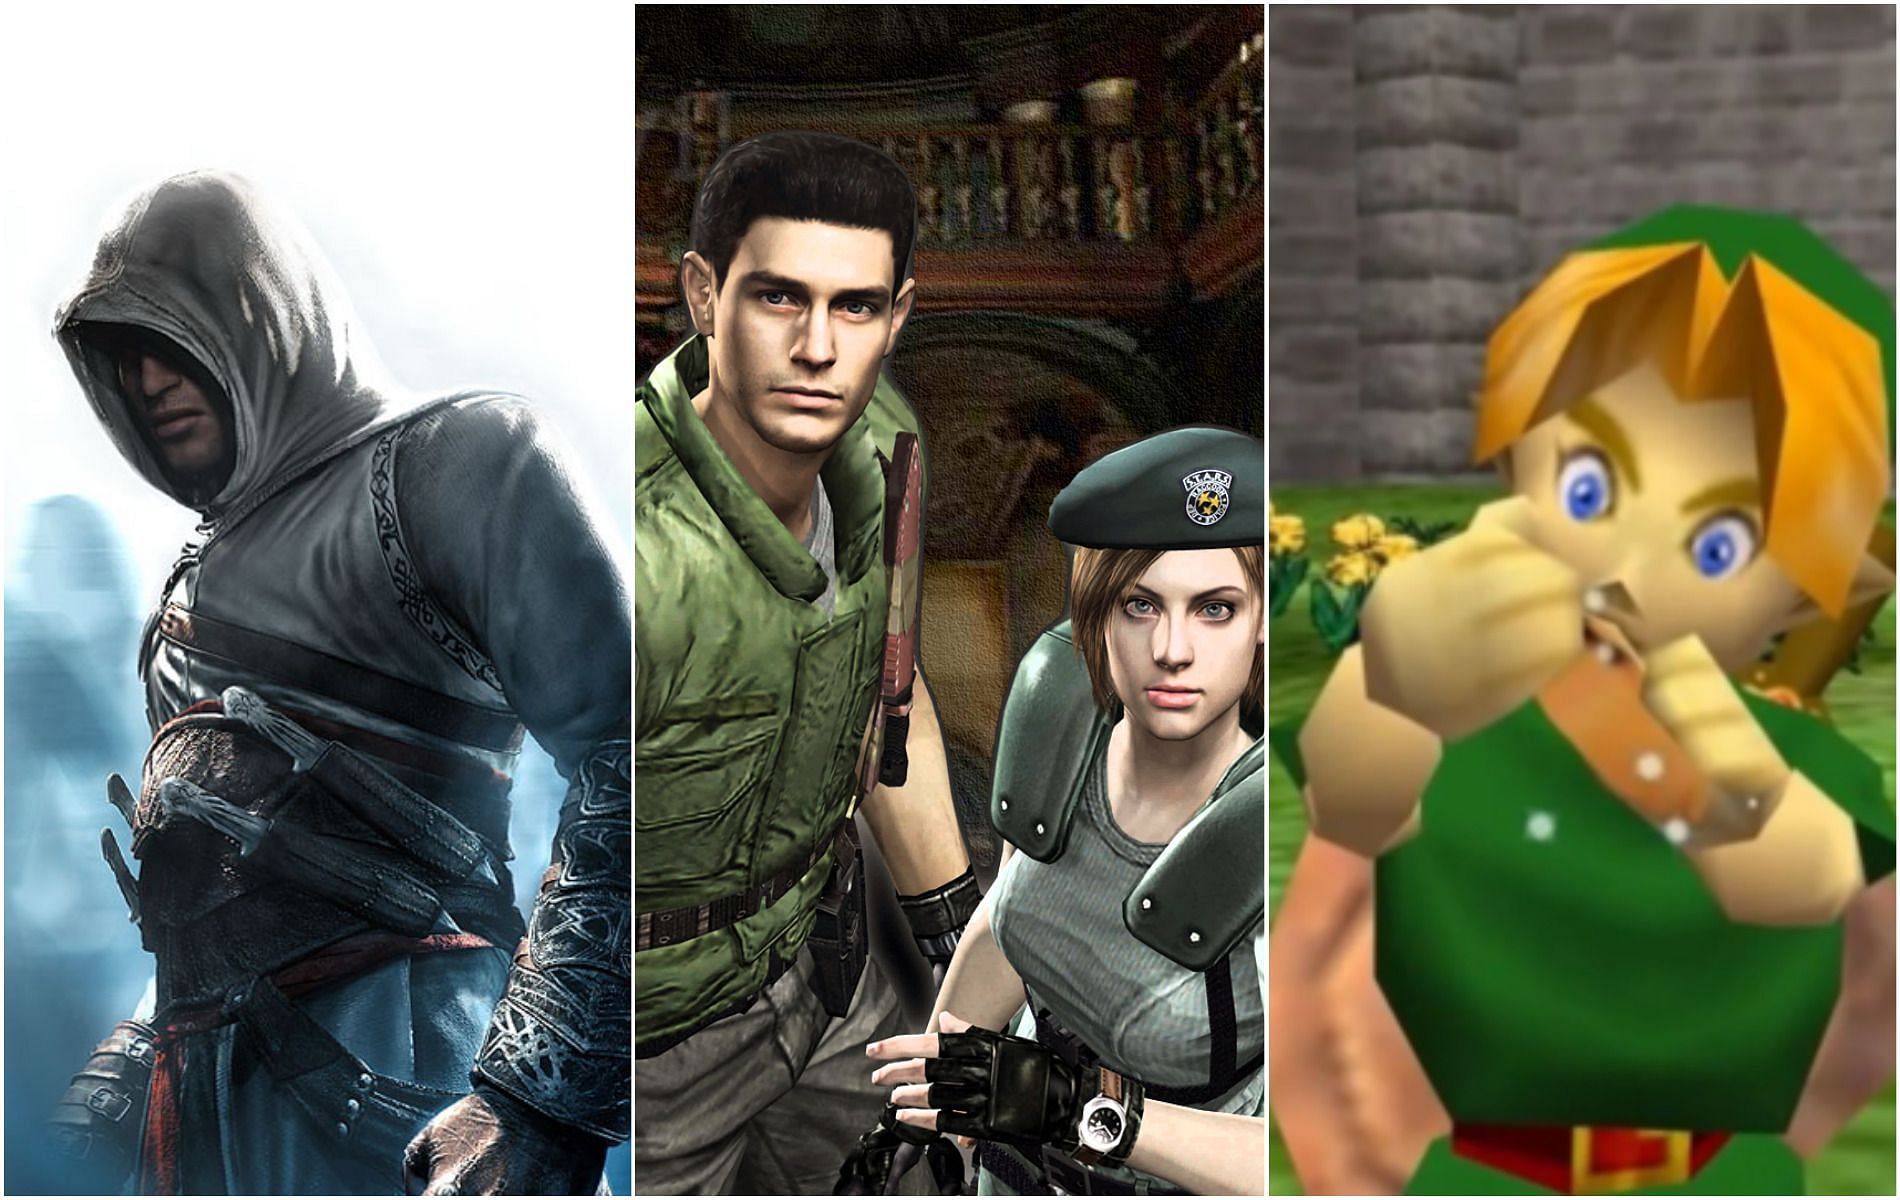 These are some of the biggest names in gaming (Images via Ubisoft/Capcom/Nintendo)